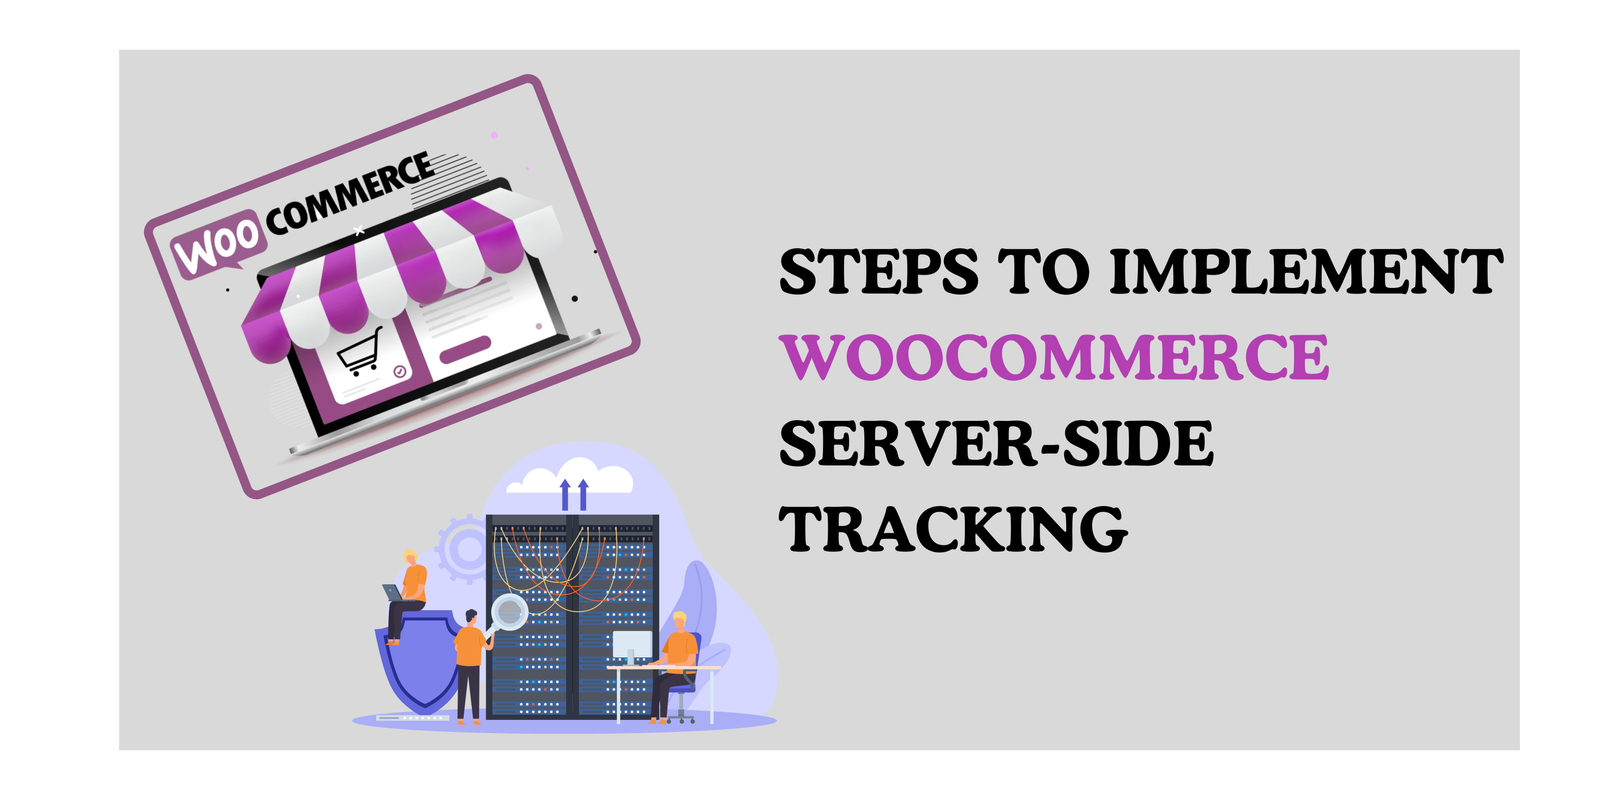 Steps to Implement WooCommerce Server-Side Tracking